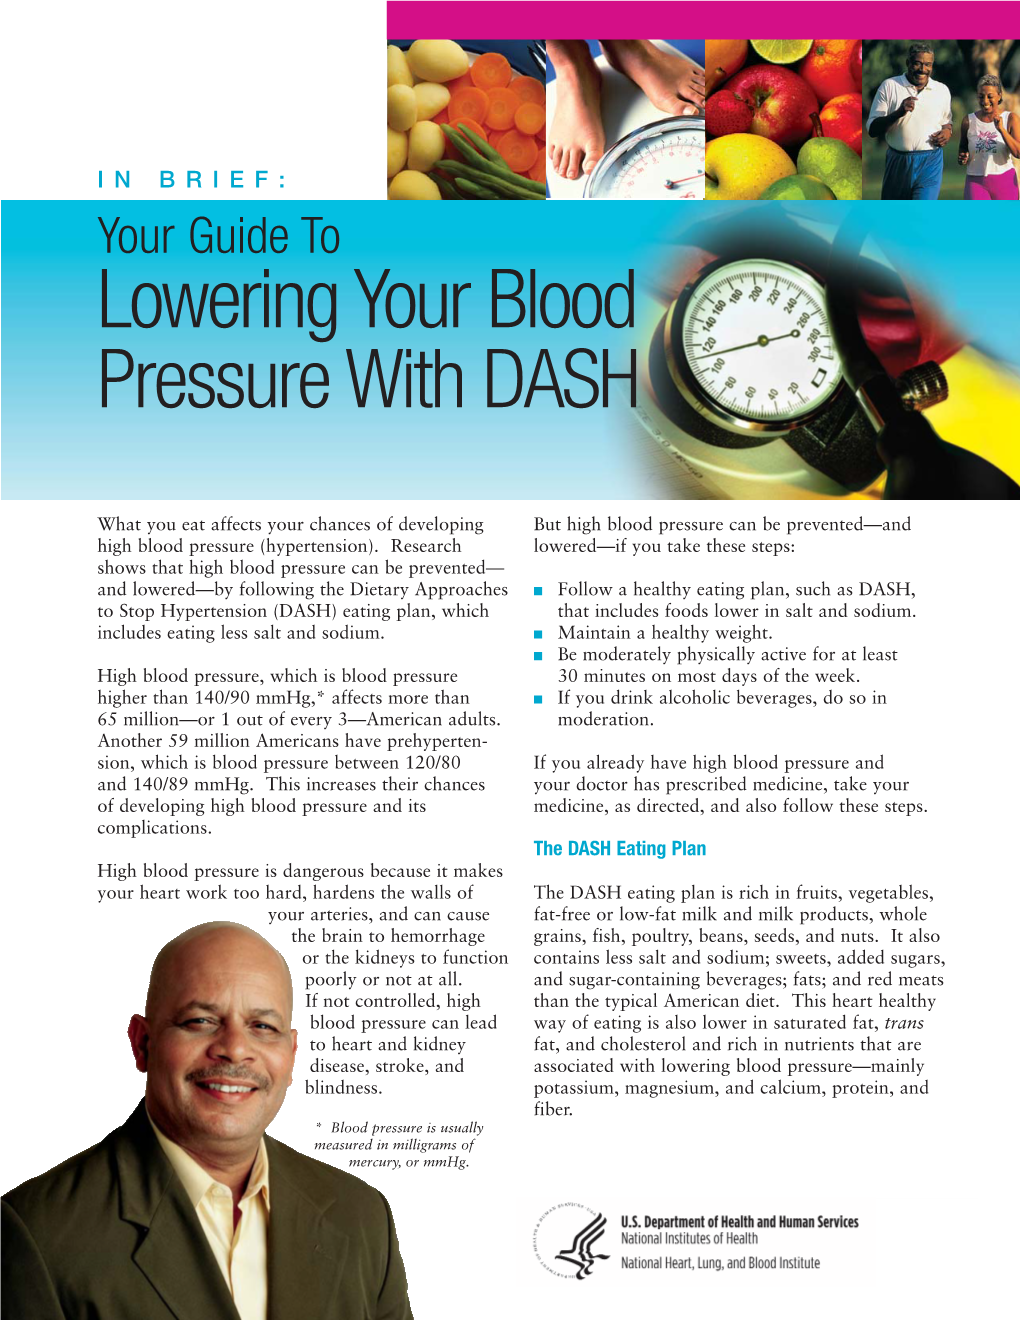 IN BRIEF: Your Guide to Lowering Your Blood Pressure with DASH